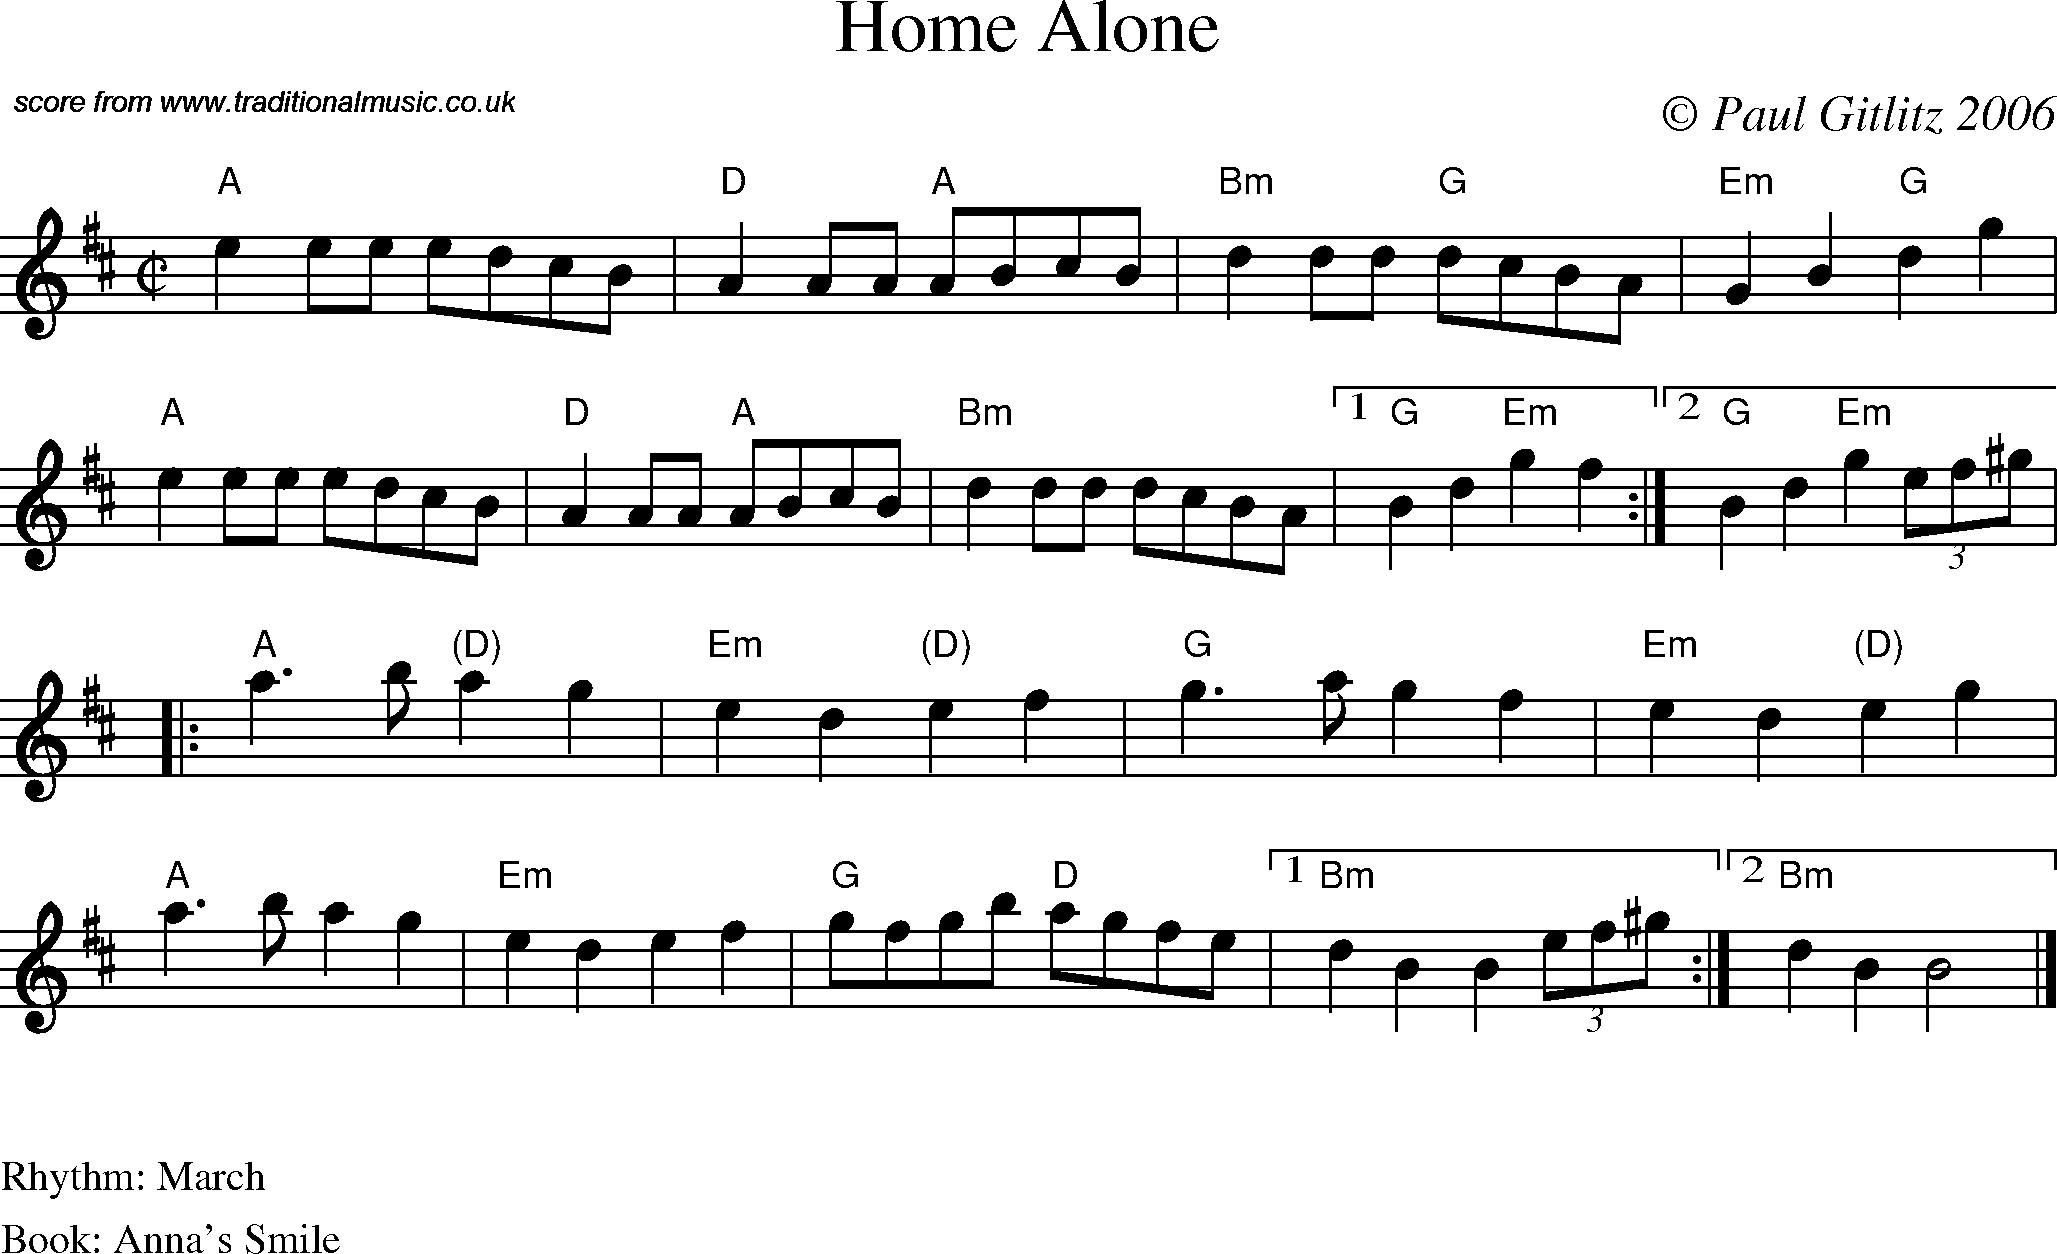 Sheet Music Score for Reel - Home Alone